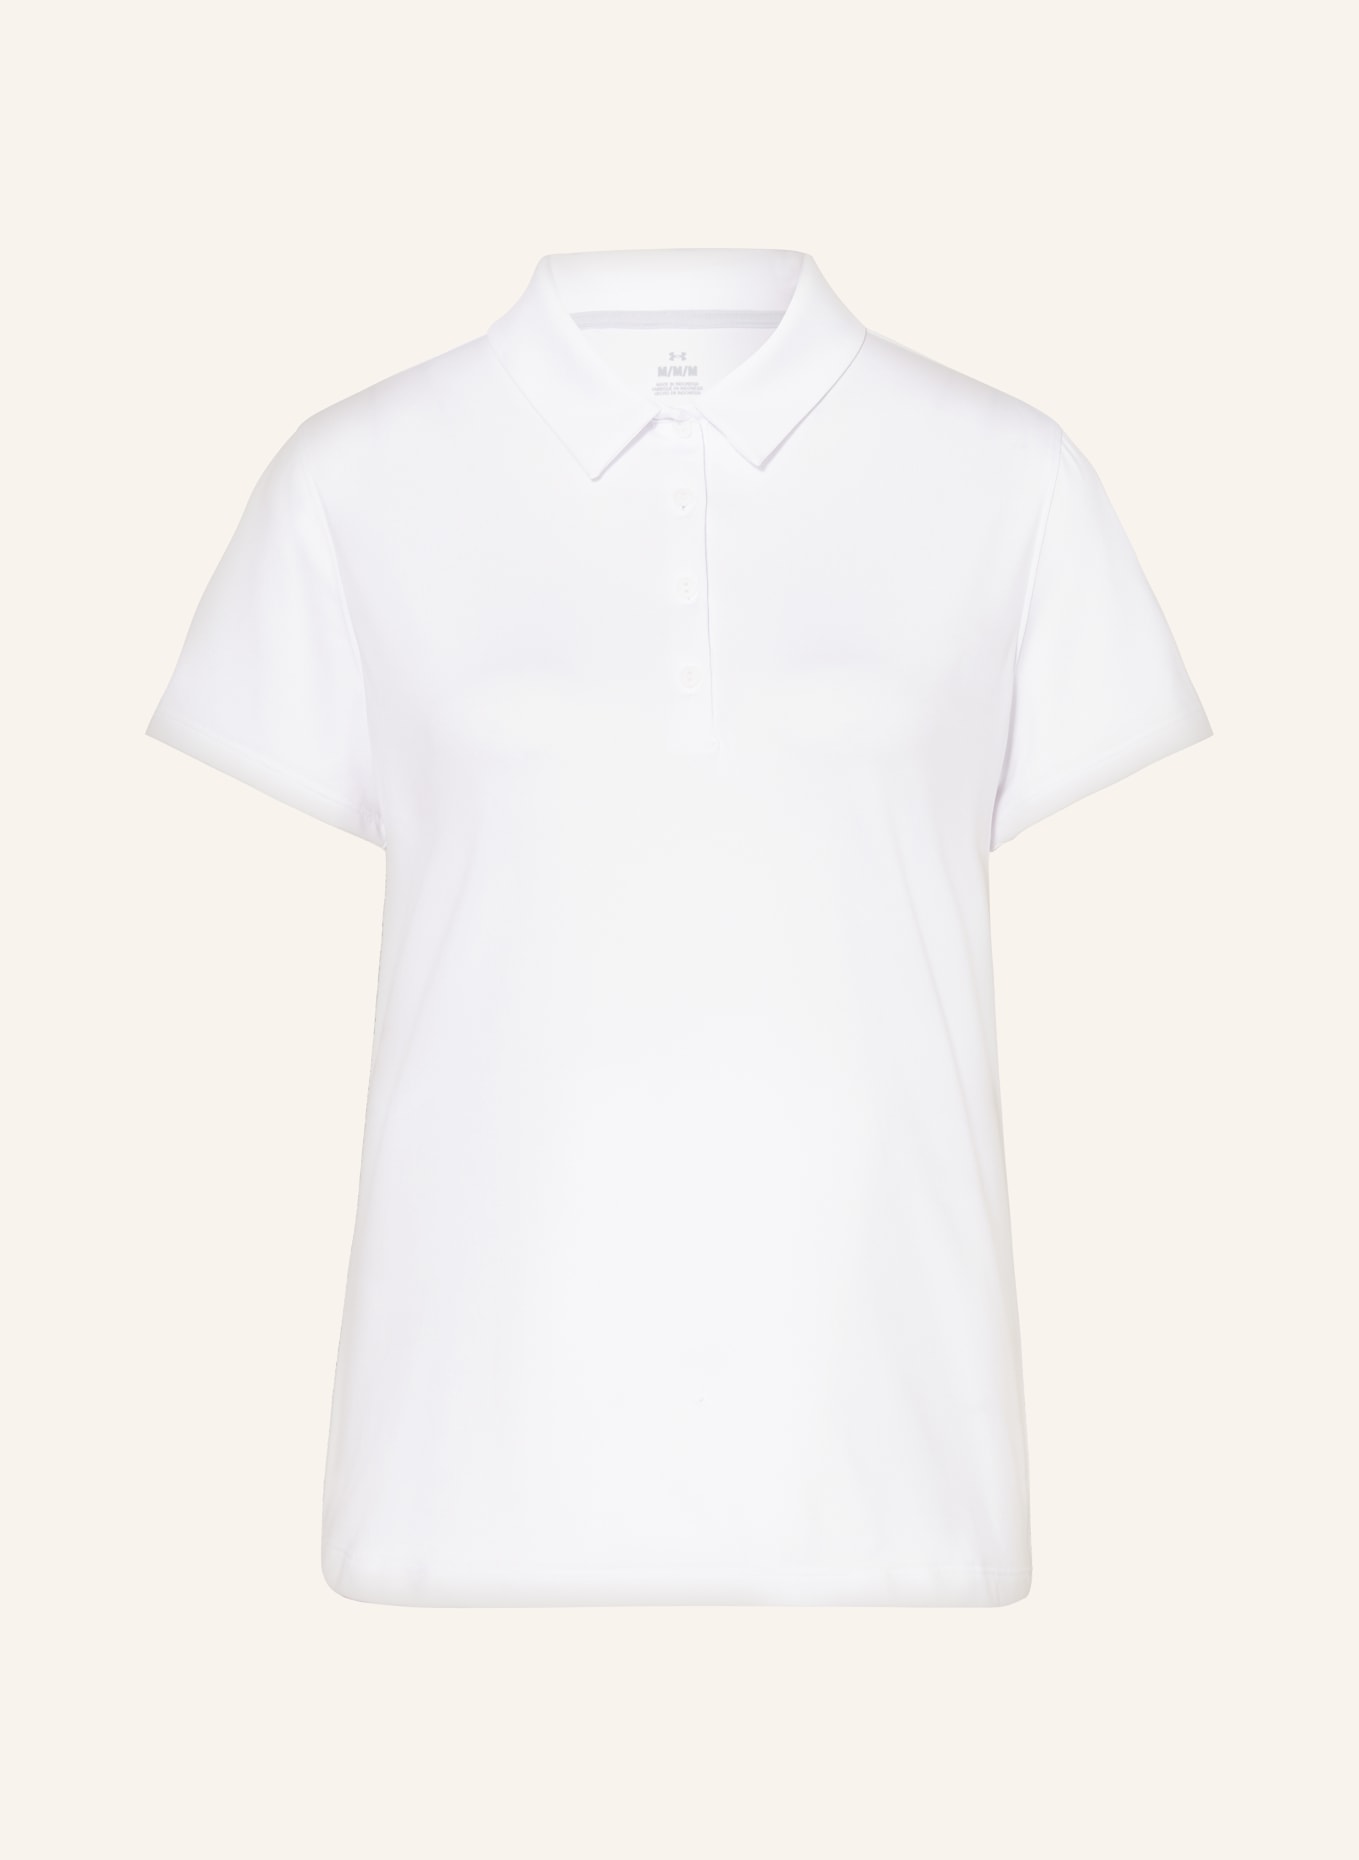 UNDER ARMOUR Funktions-Poloshirt UA PLAYOFF, Farbe: WEISS (Bild 1)